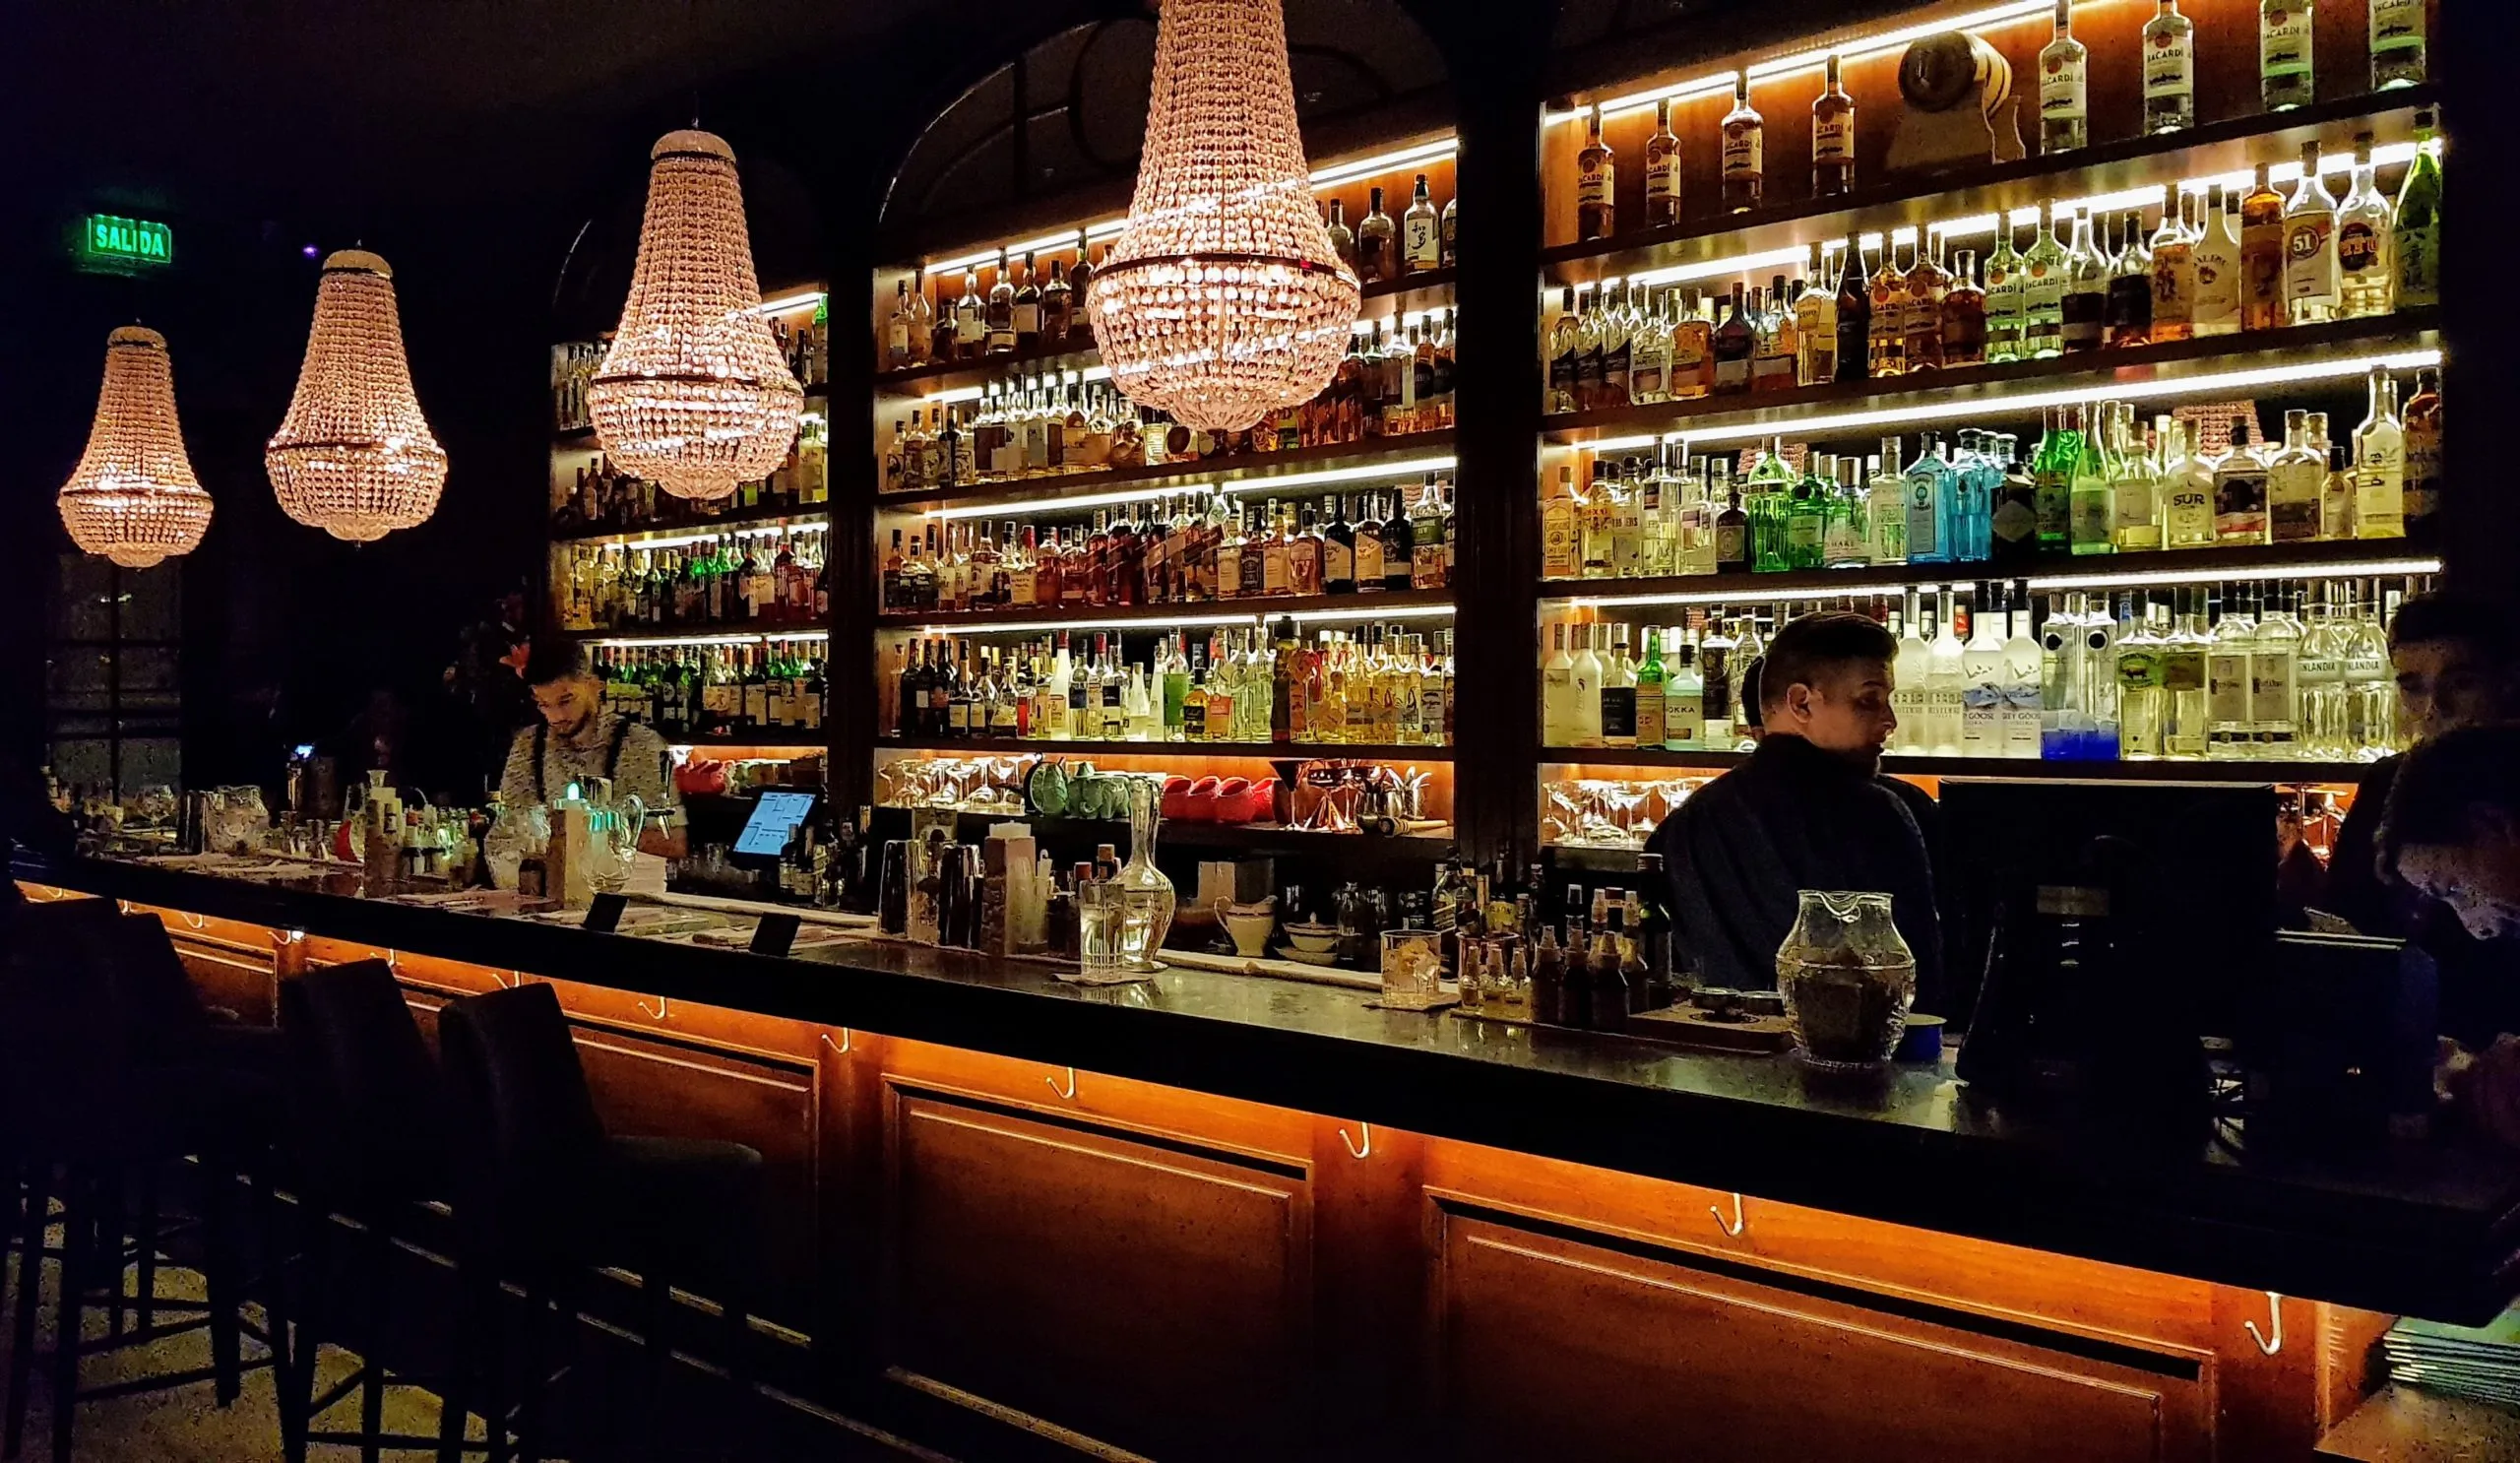 Presidente Bar in Argentina, South America | Bars - Rated 4.7